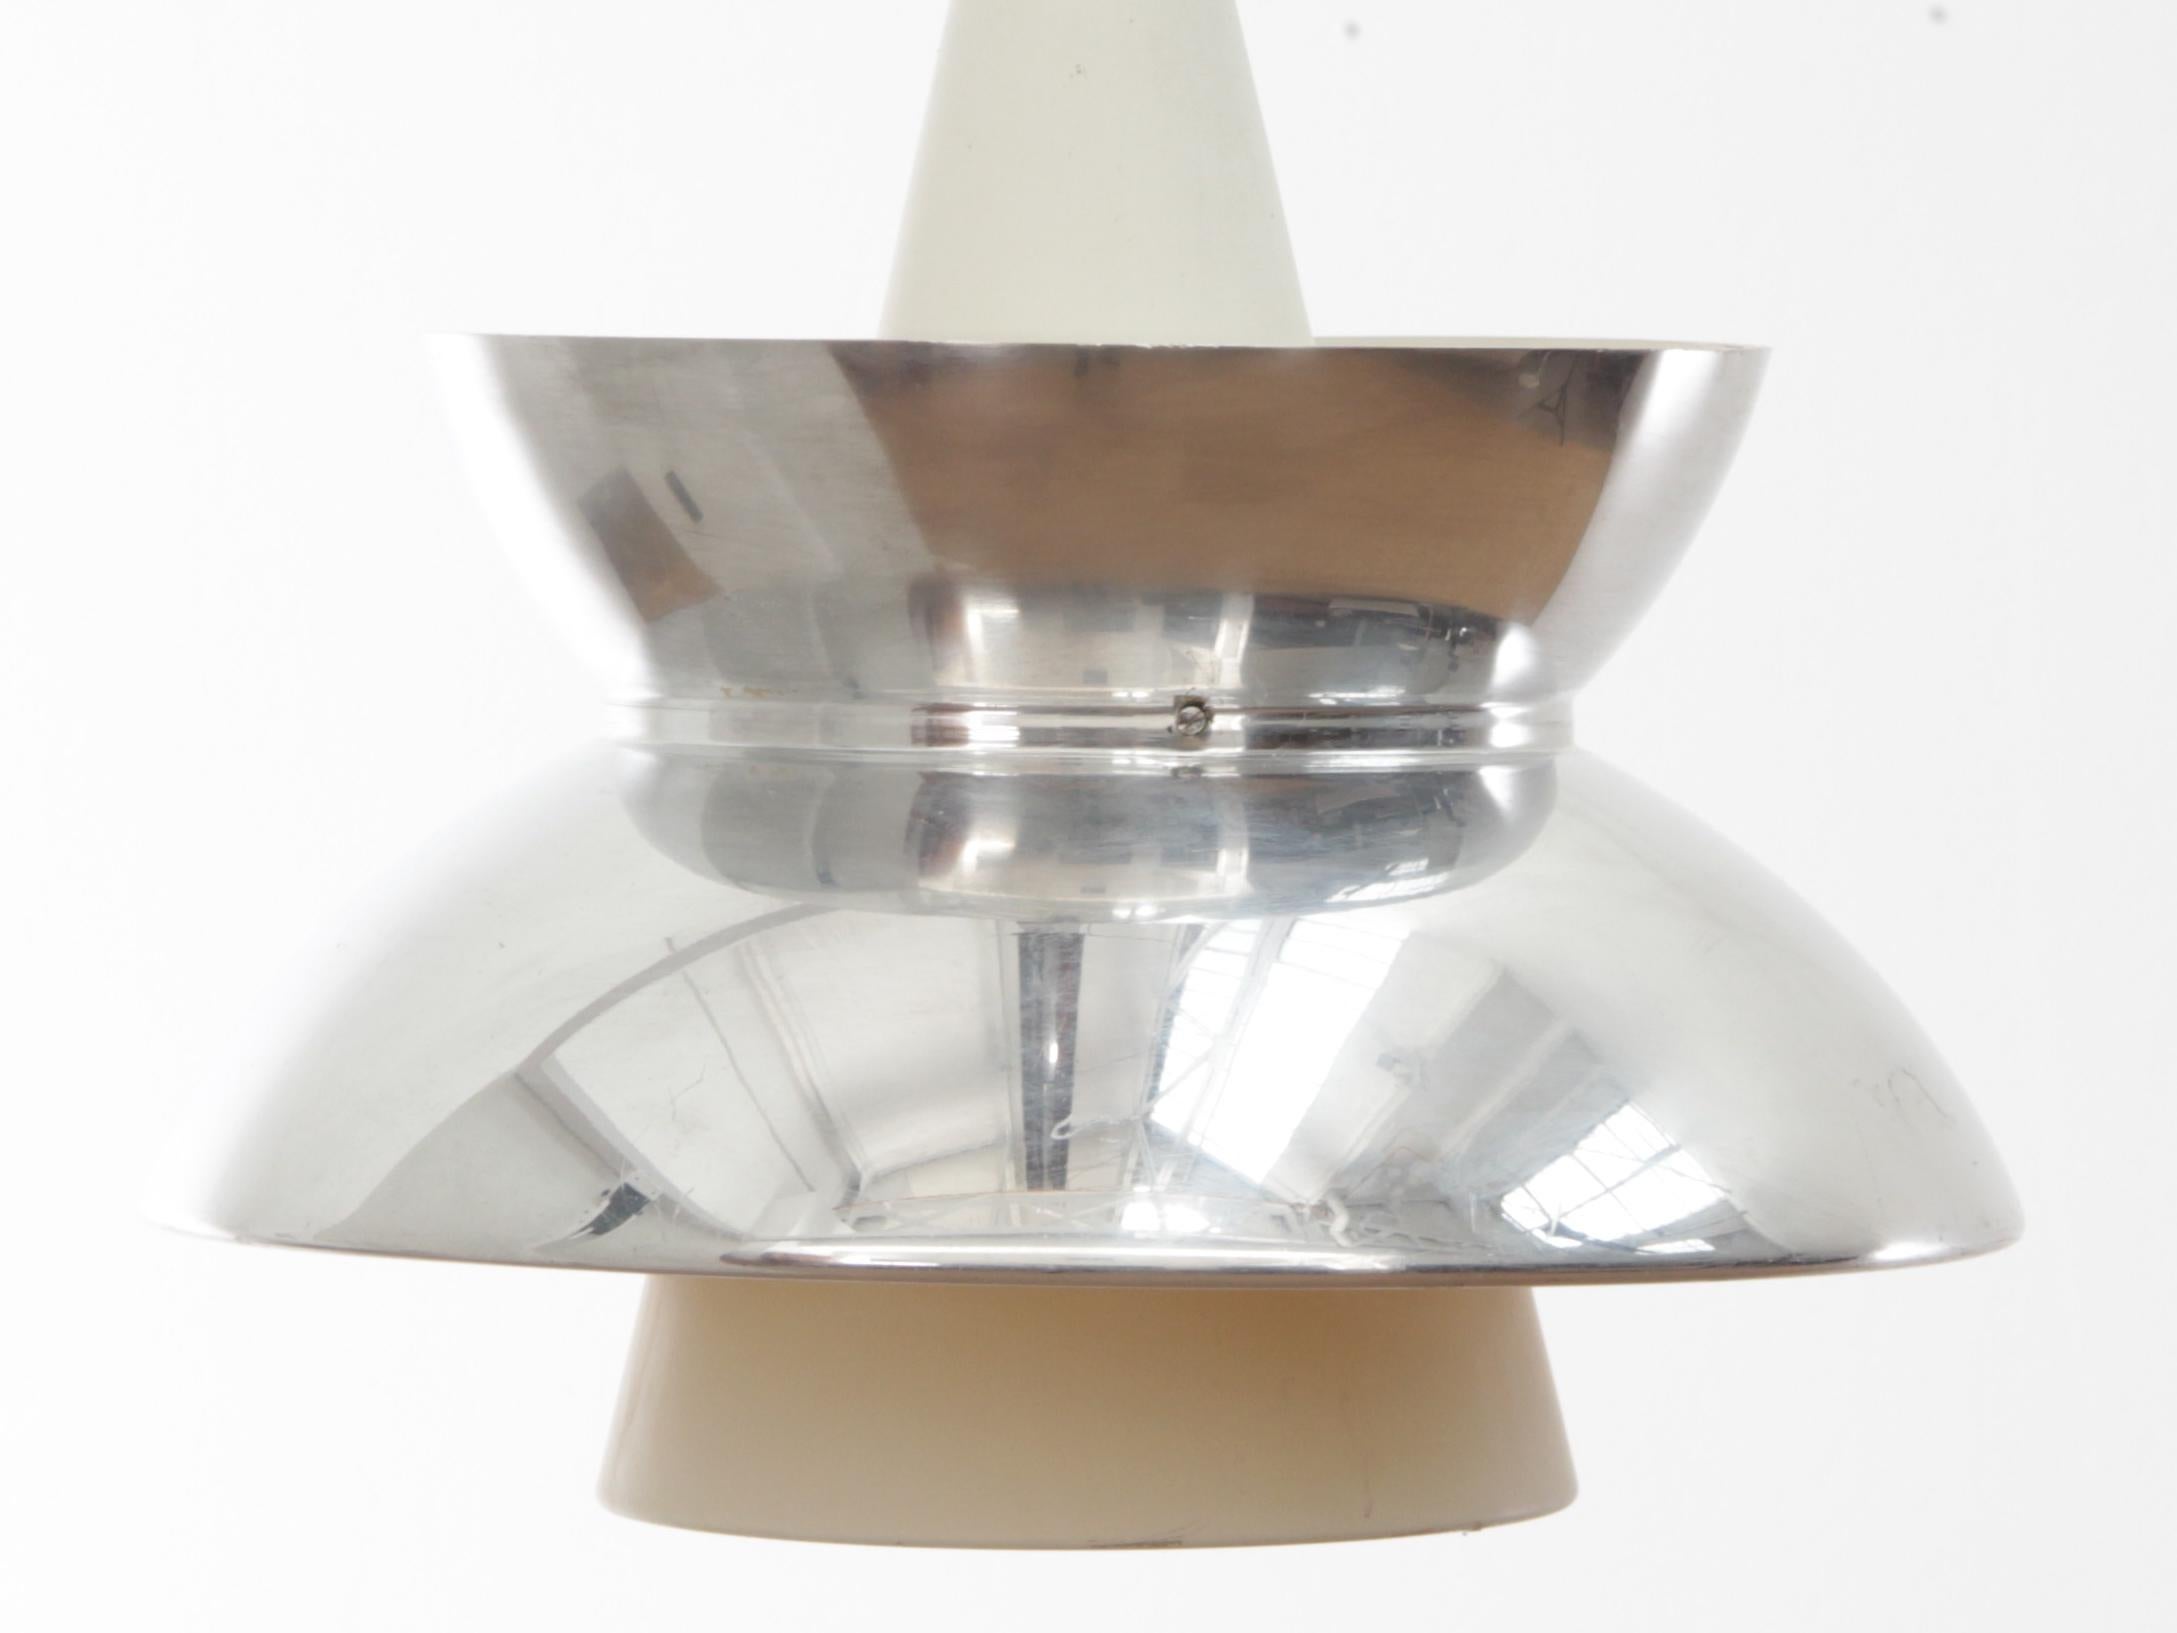 Mid-Century Modern Scandinavian pendant lamp Doo-Wop chrome by Louis Poulsen. Original edition. Originally introduced in the 1950s. Was designed in close cooperation between the Navy Buildings Department and Louis Poulsen. The pendant was used for